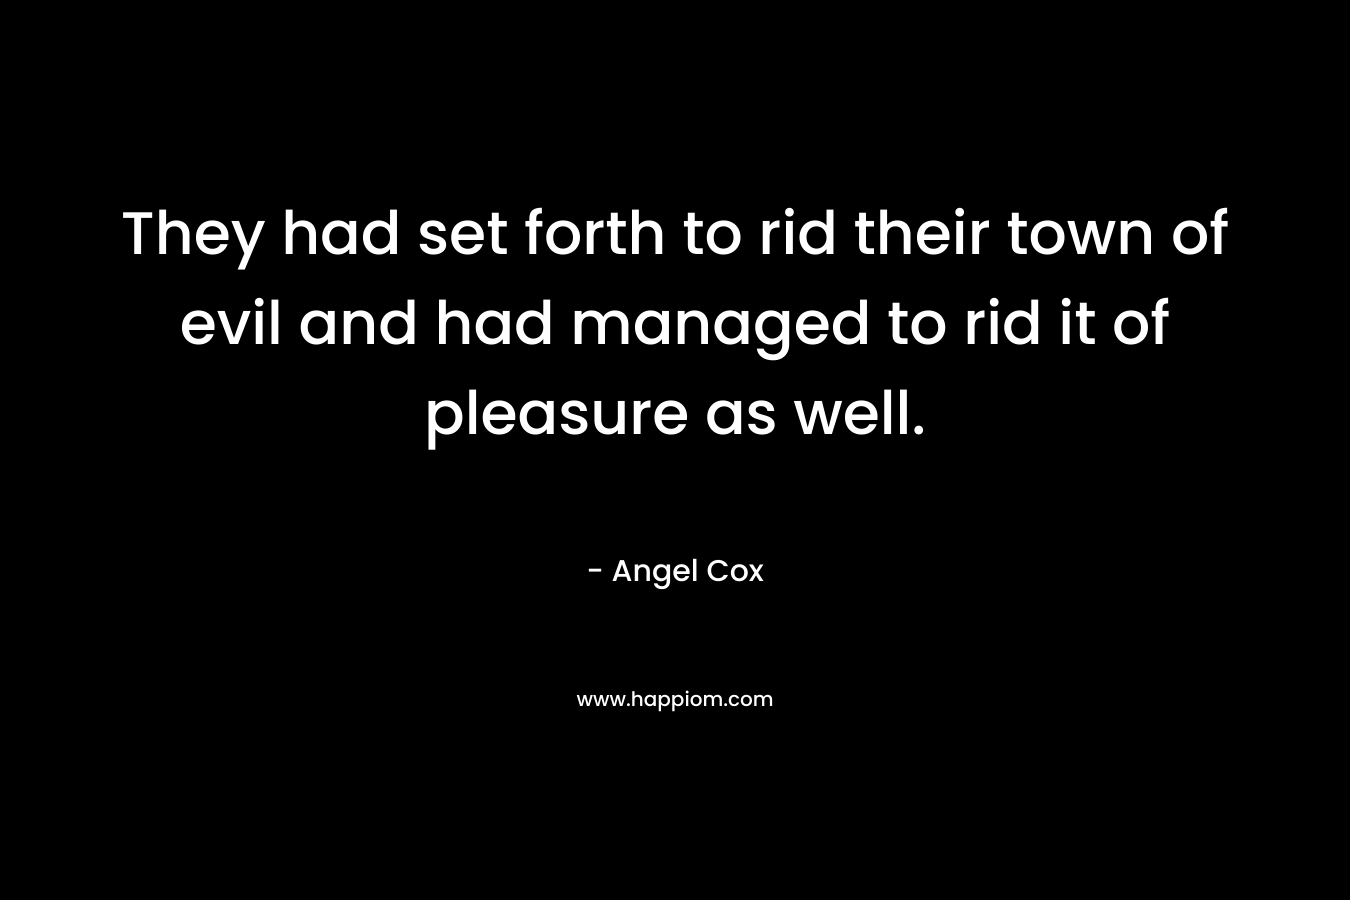 They had set forth to rid their town of evil and had managed to rid it of pleasure as well. – Angel Cox